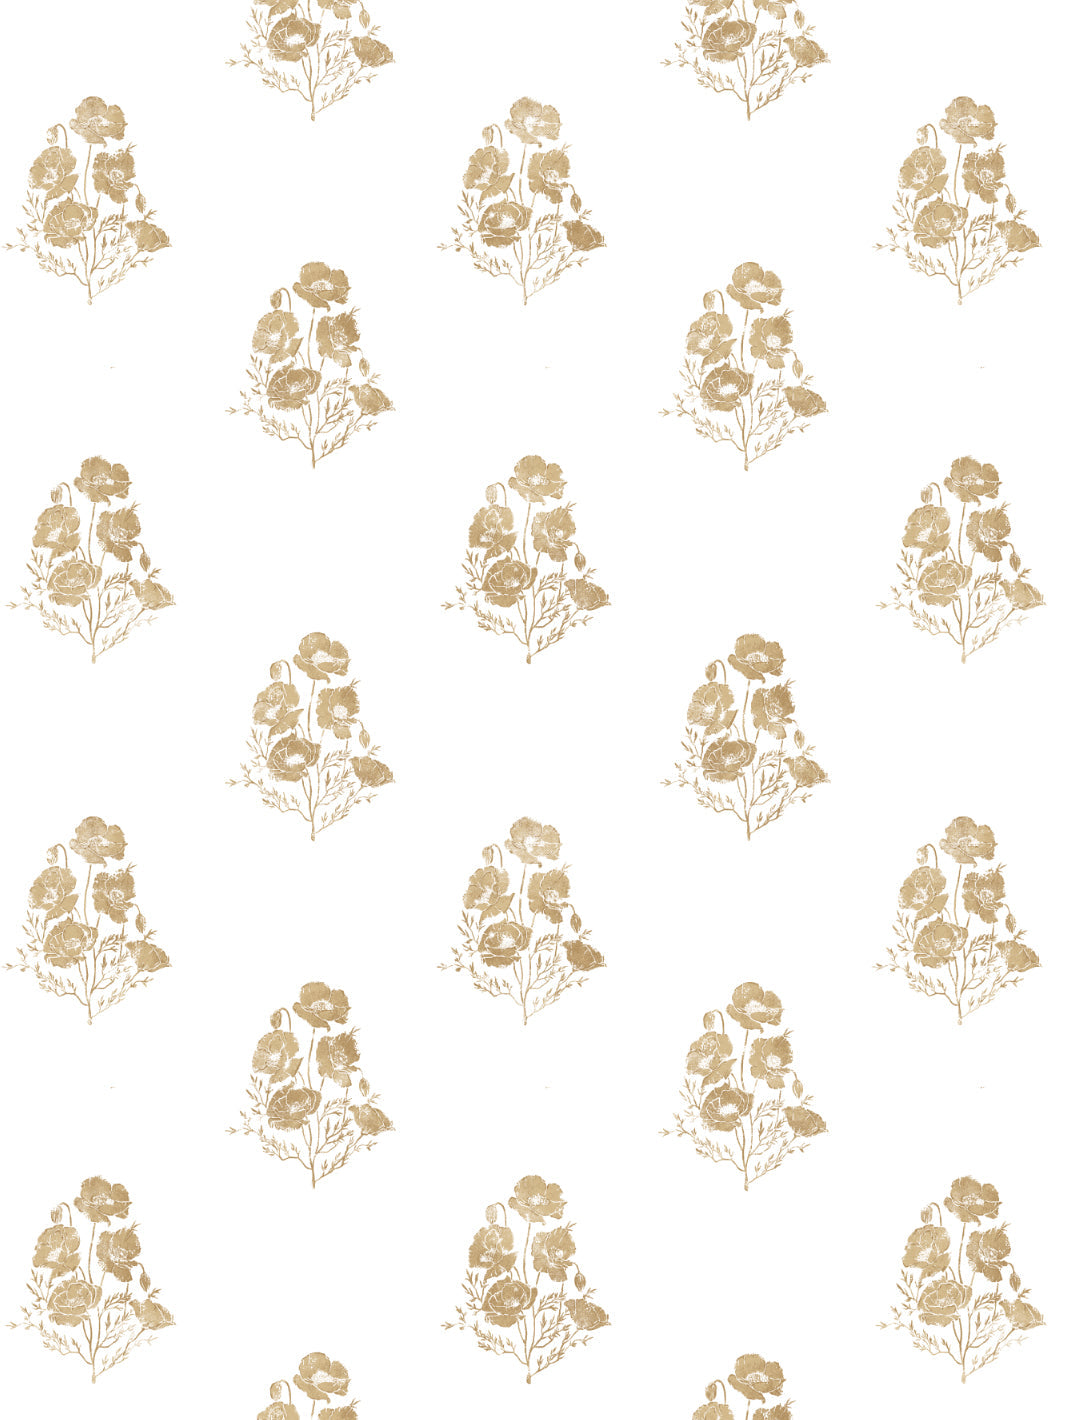 'California Poppy' Wallpaper by Nathan Turner - Gold